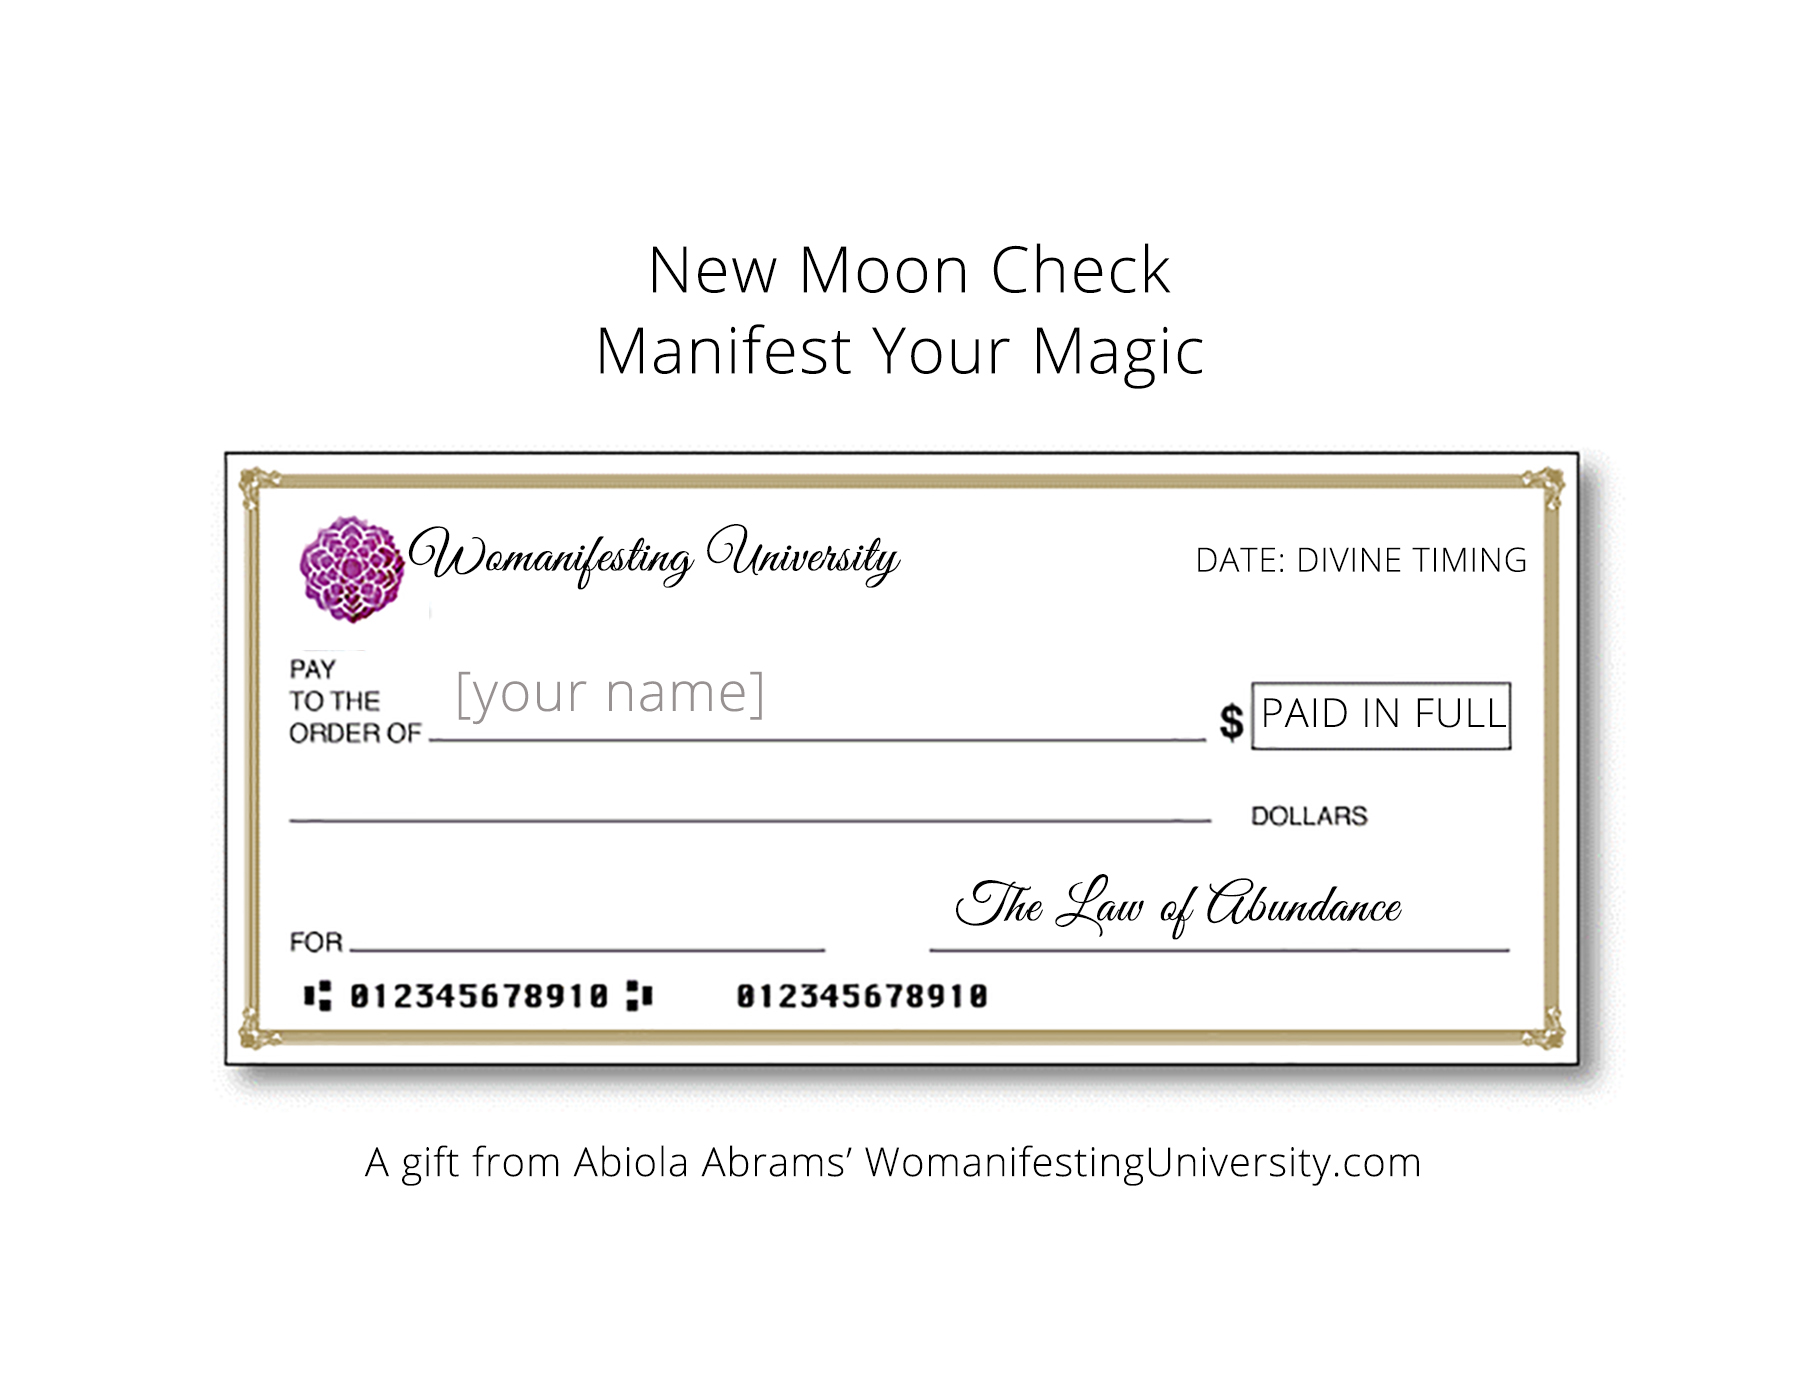 new moon check fro the universe - law of attraction